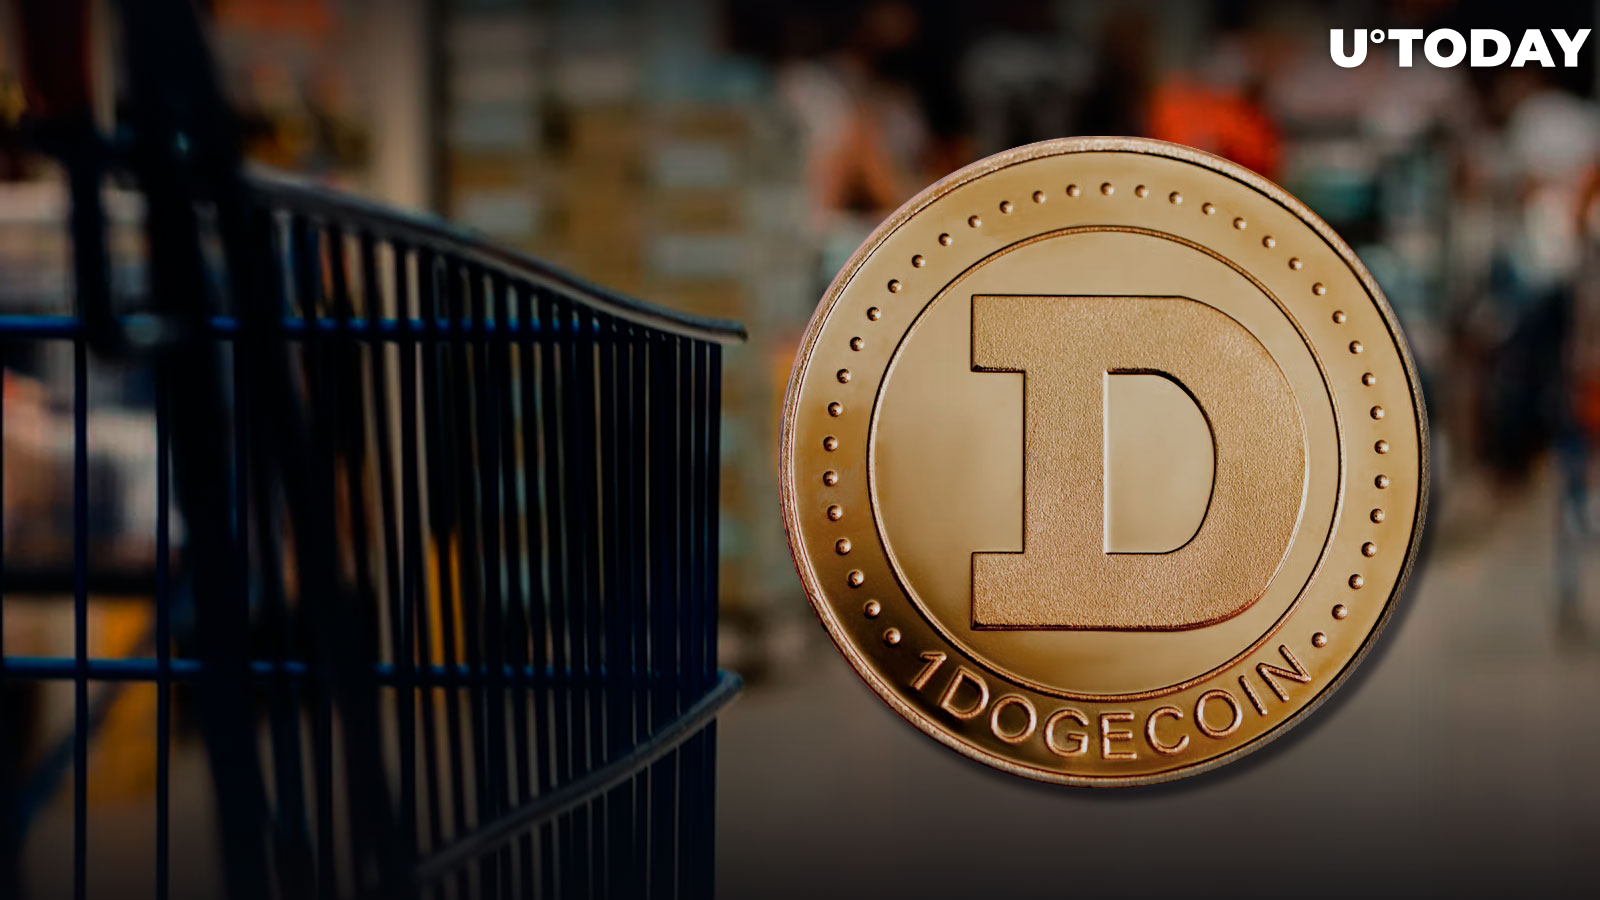 Dogecoin Comes to US Grocery Stores